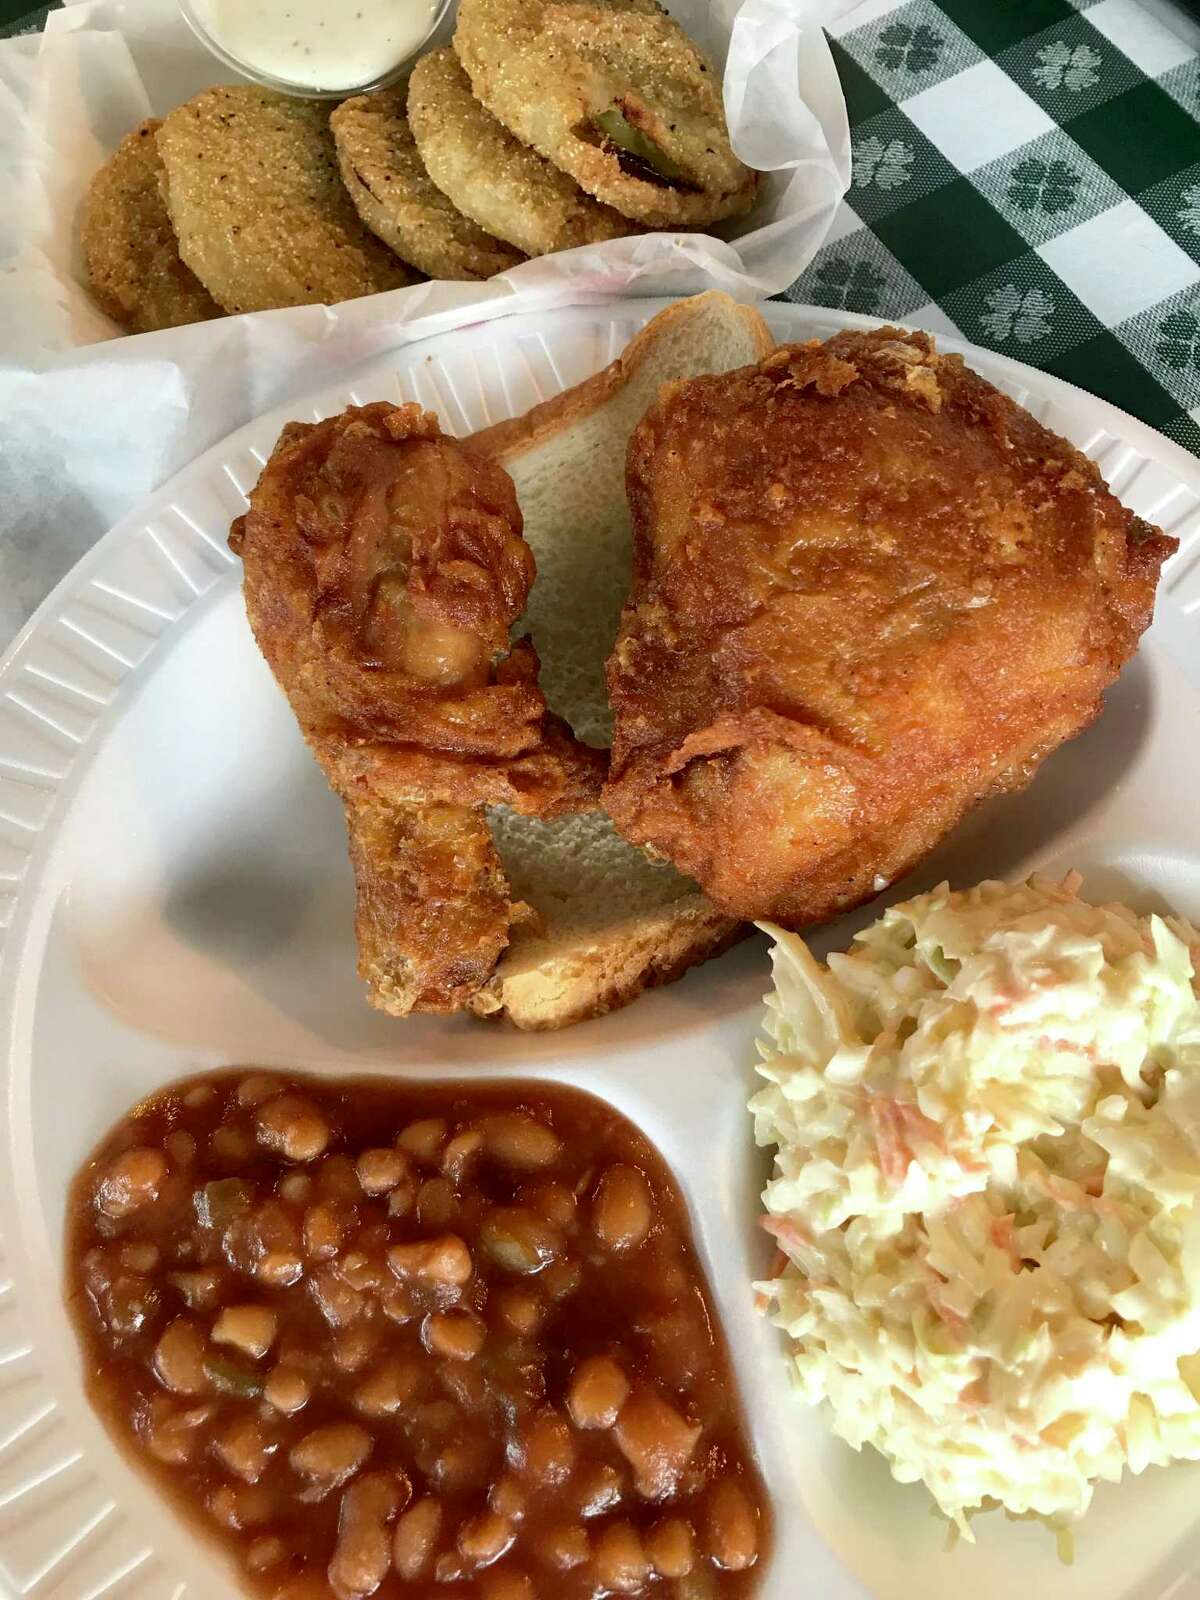 Fried green tomatoes, fried chicken, baked beans and coleslaw from Gus's World Famous Fried Chicken